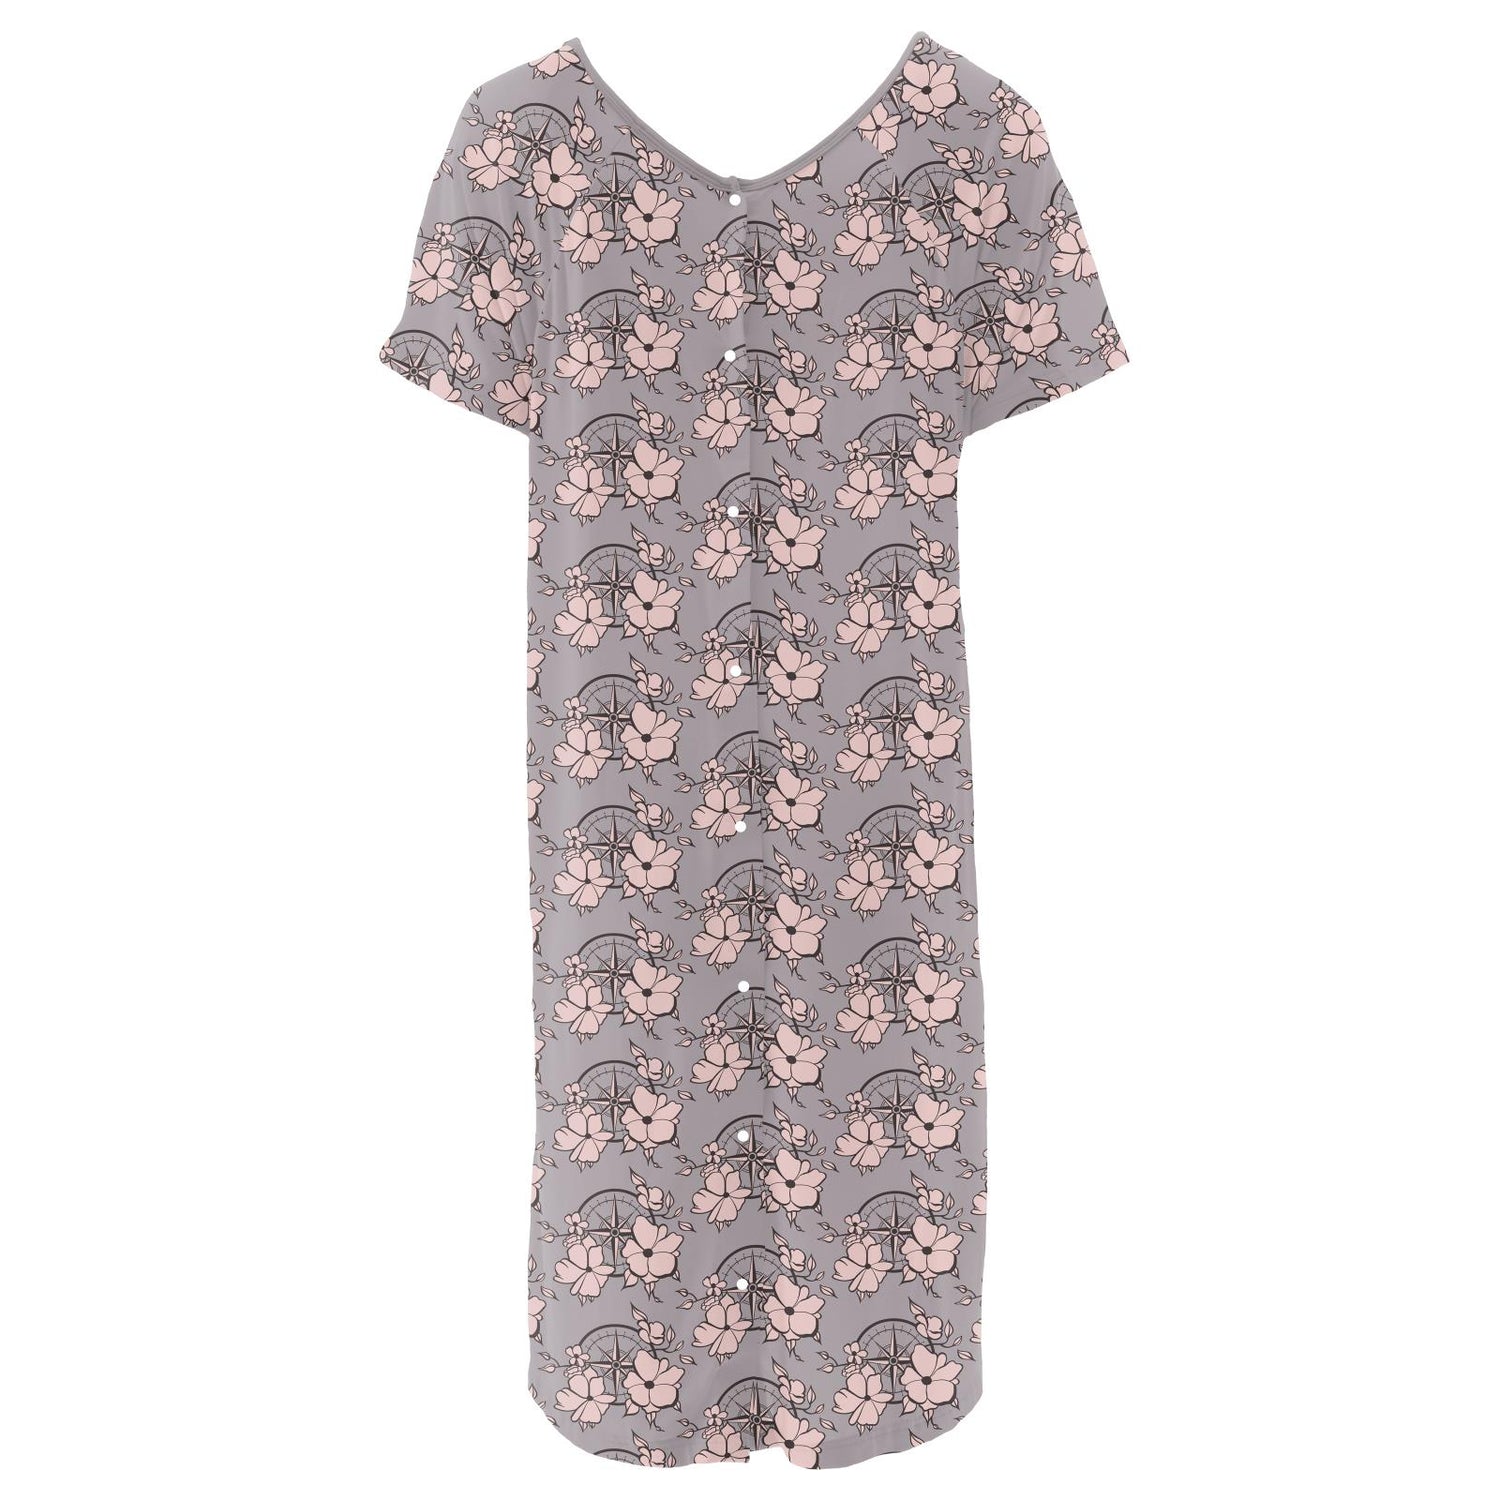 Women's Print Hospital Gown in Feather Nautical Floral